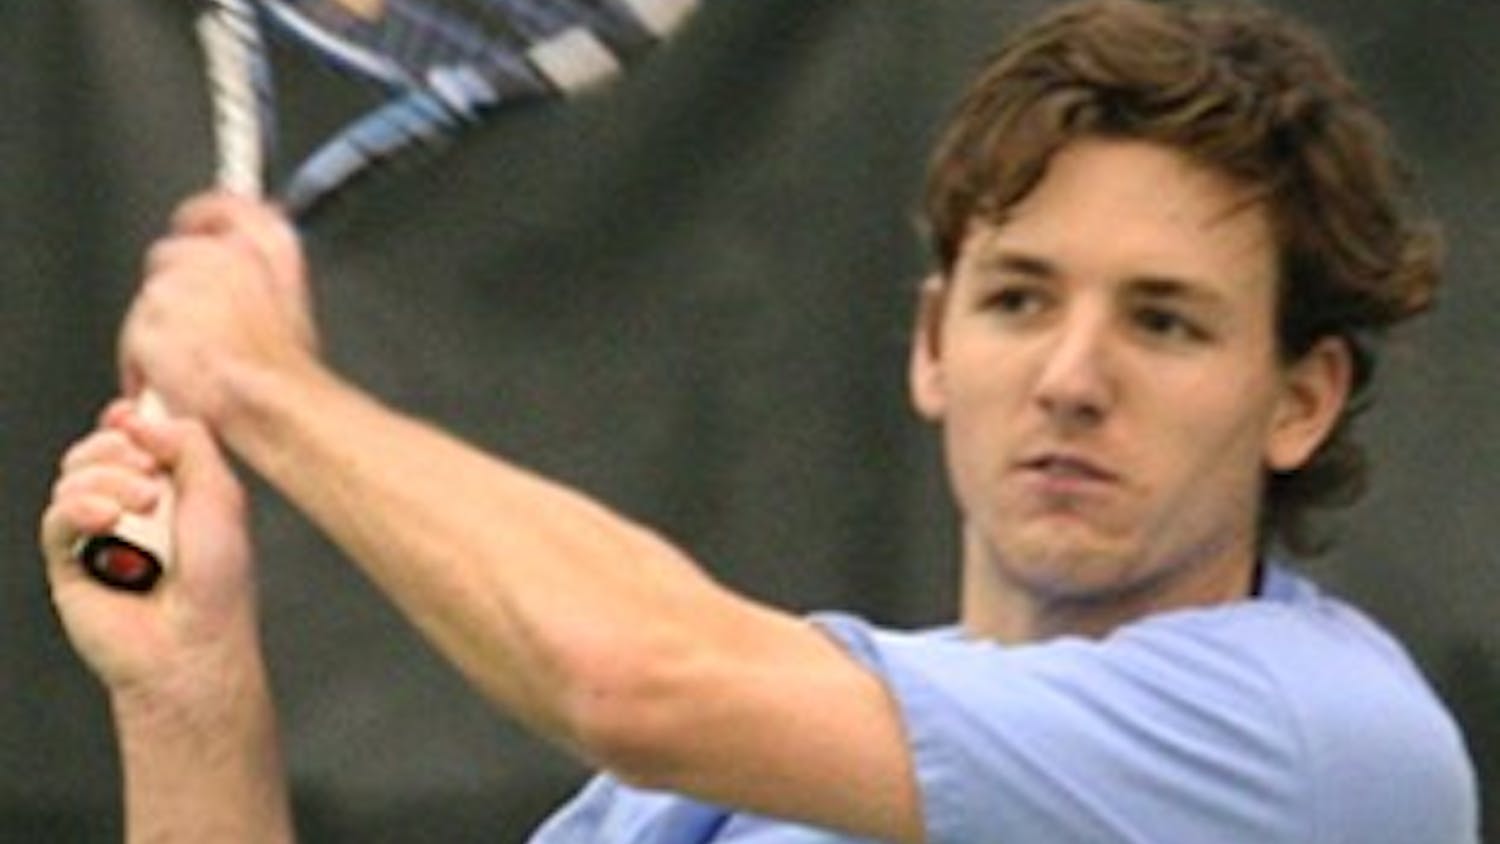 Kyle Baker struggled down the stretch of his first match this season, but he pulled it together for a win. DTH/Daixi Xu